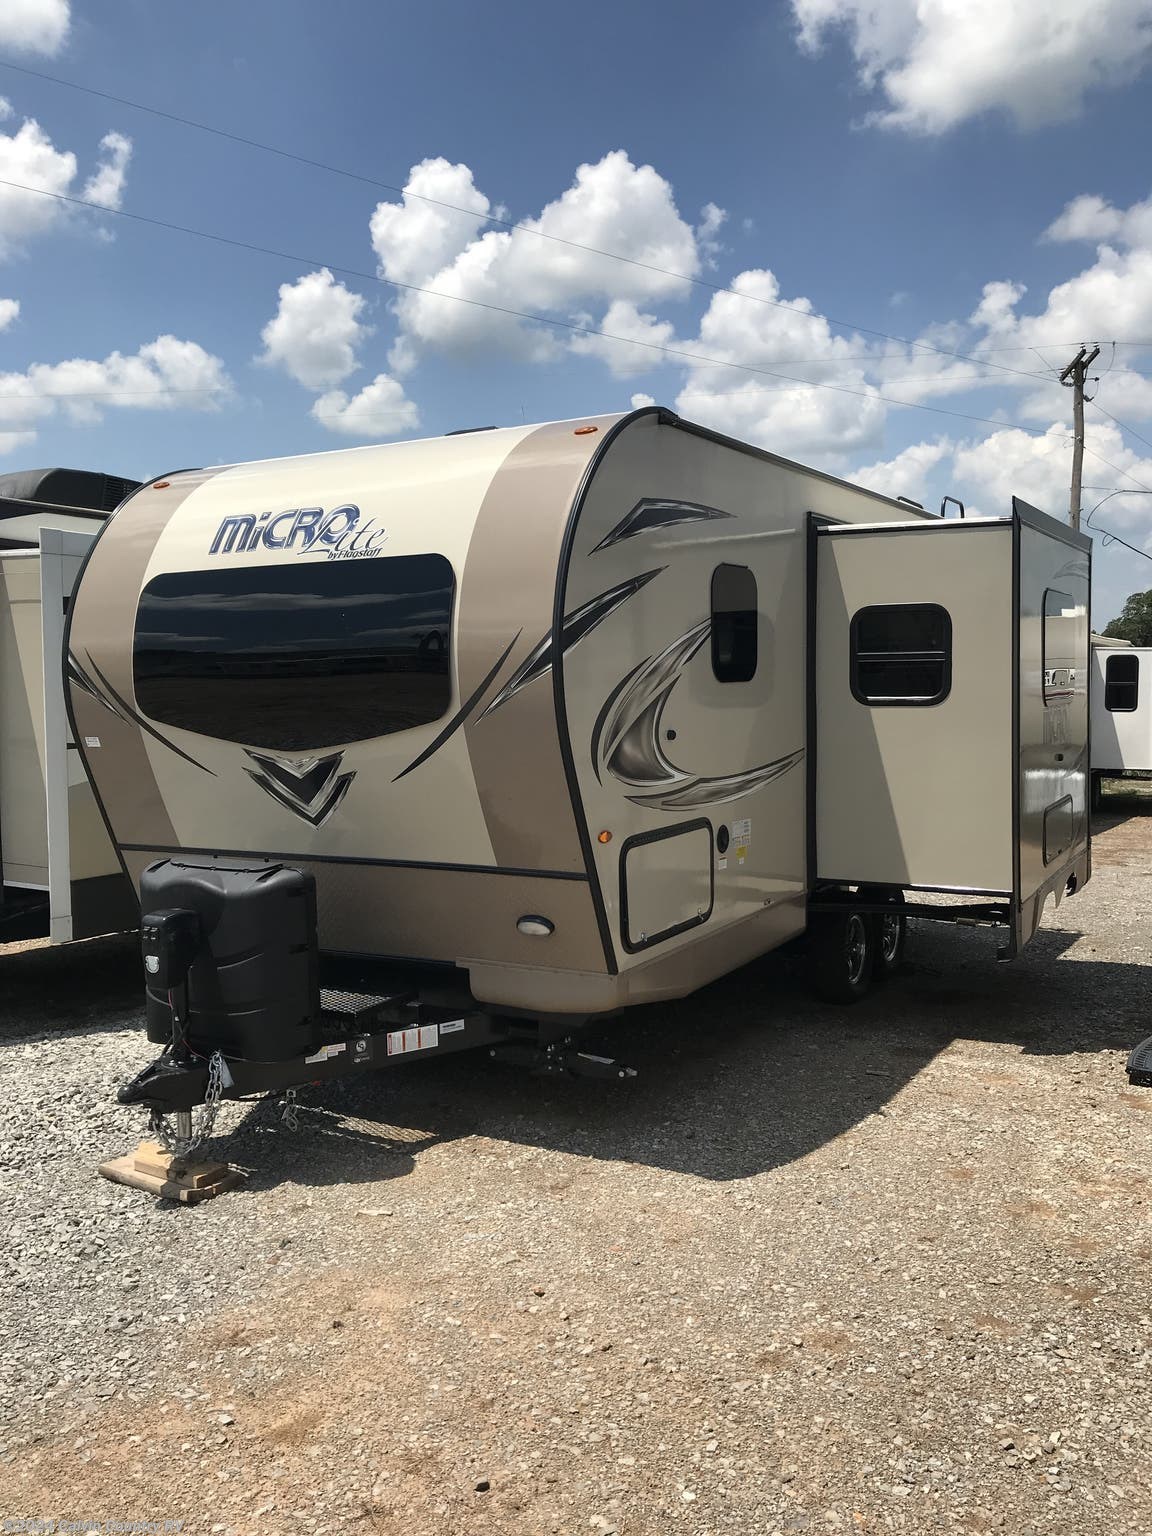 2019 Forest River Flagstaff Micro Lite 21DS RV for Sale in Depew, OK 74028-2512 | 2420819 2019 Forest River Flagstaff Micro Lite 21ds